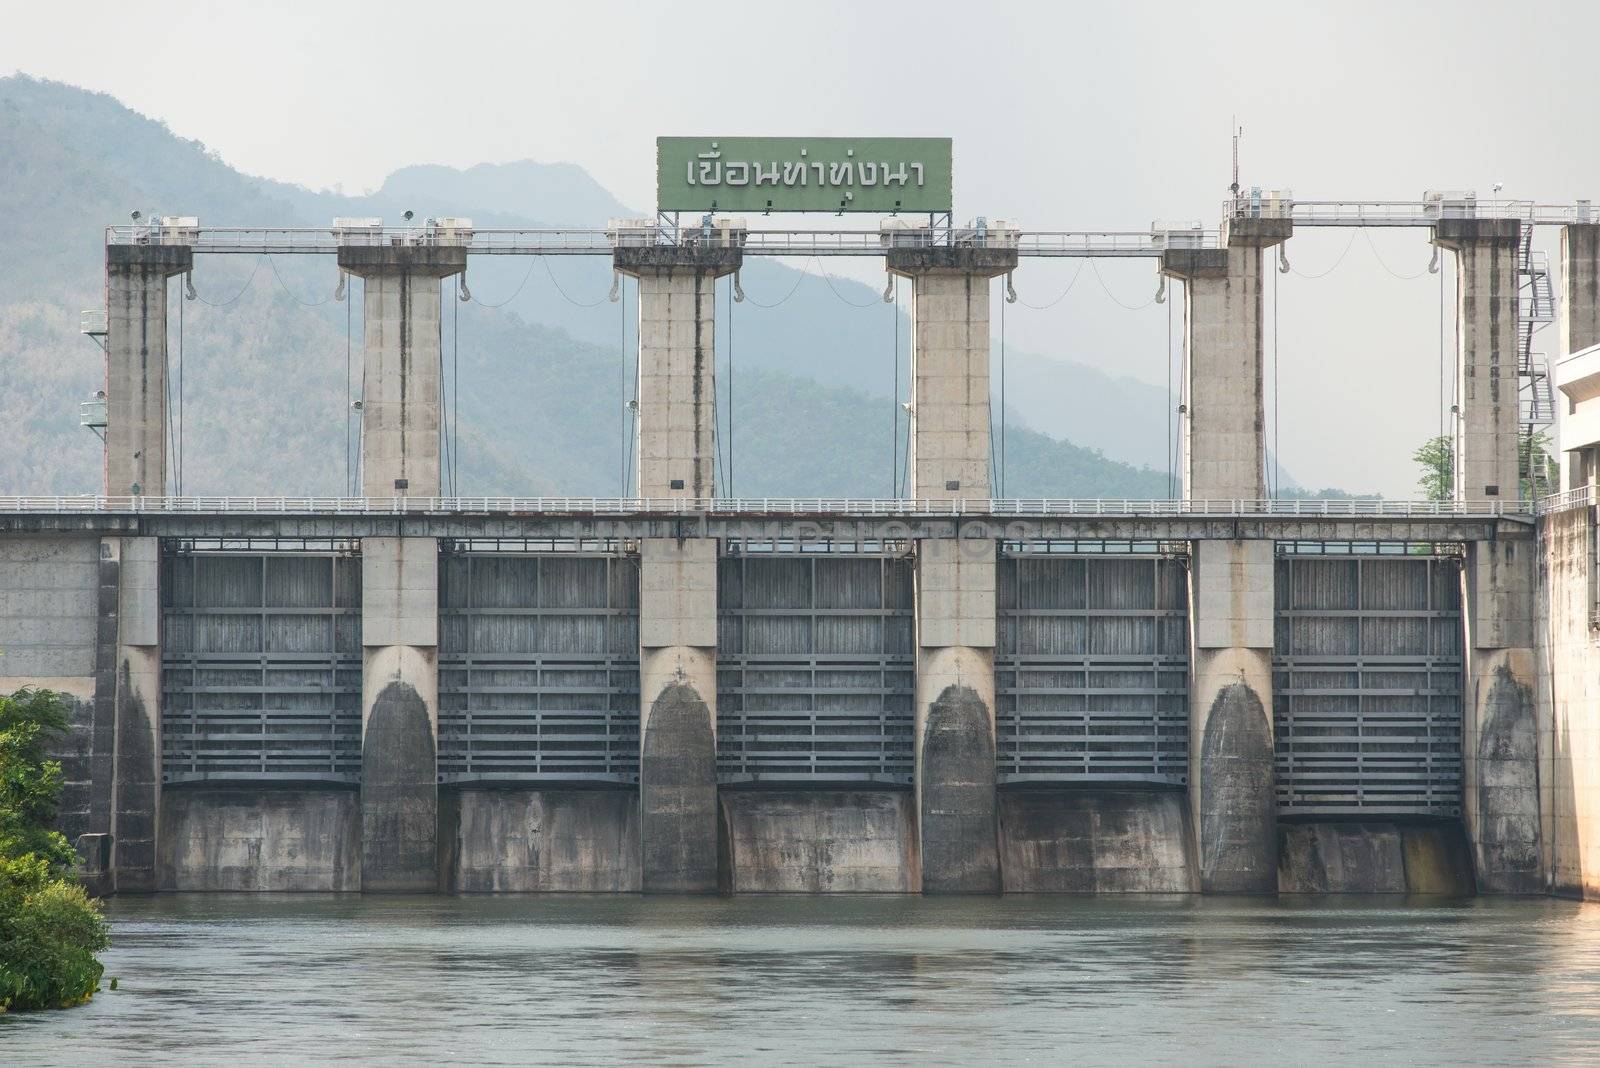 Medium size dam with metal water gate in Thailand, taken on a cloudy day